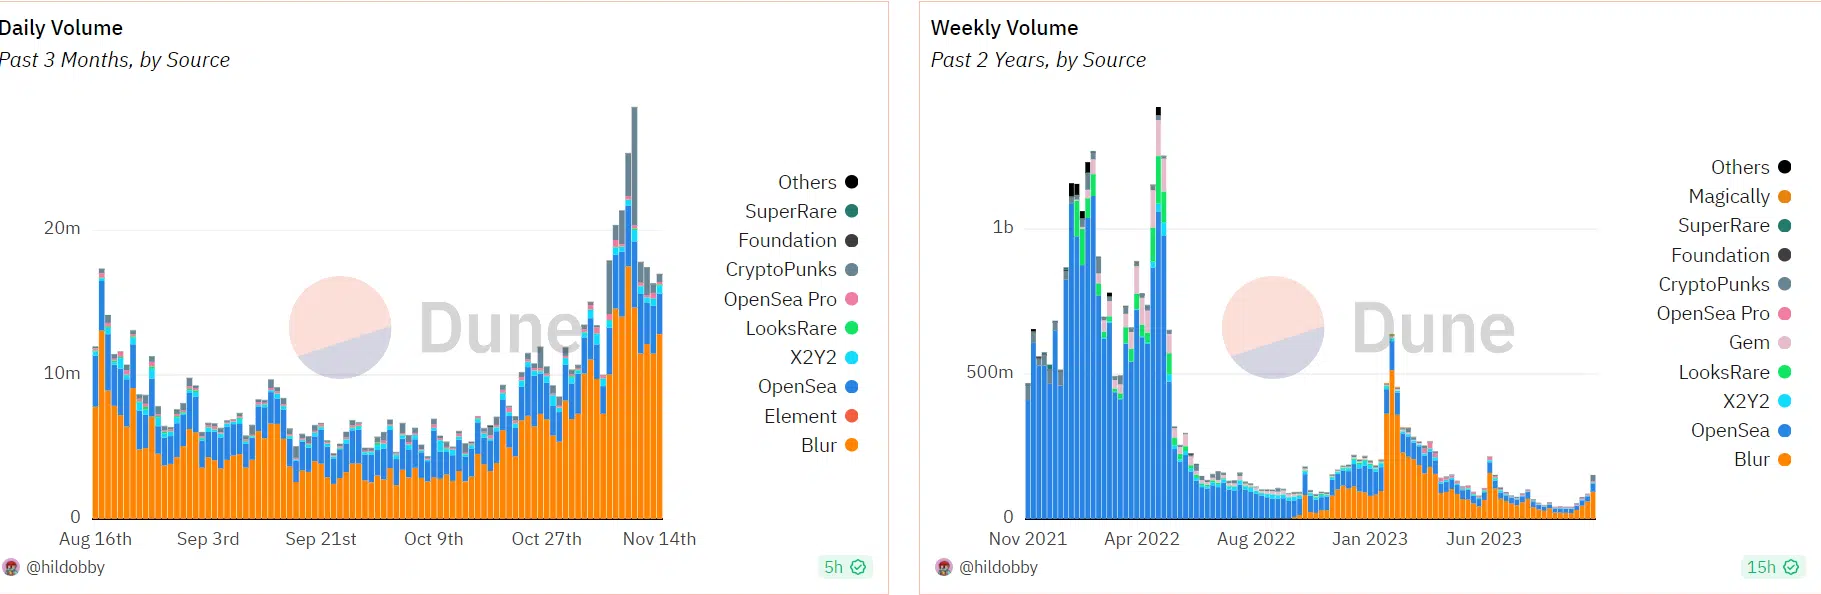 Blur daily and weekly volume